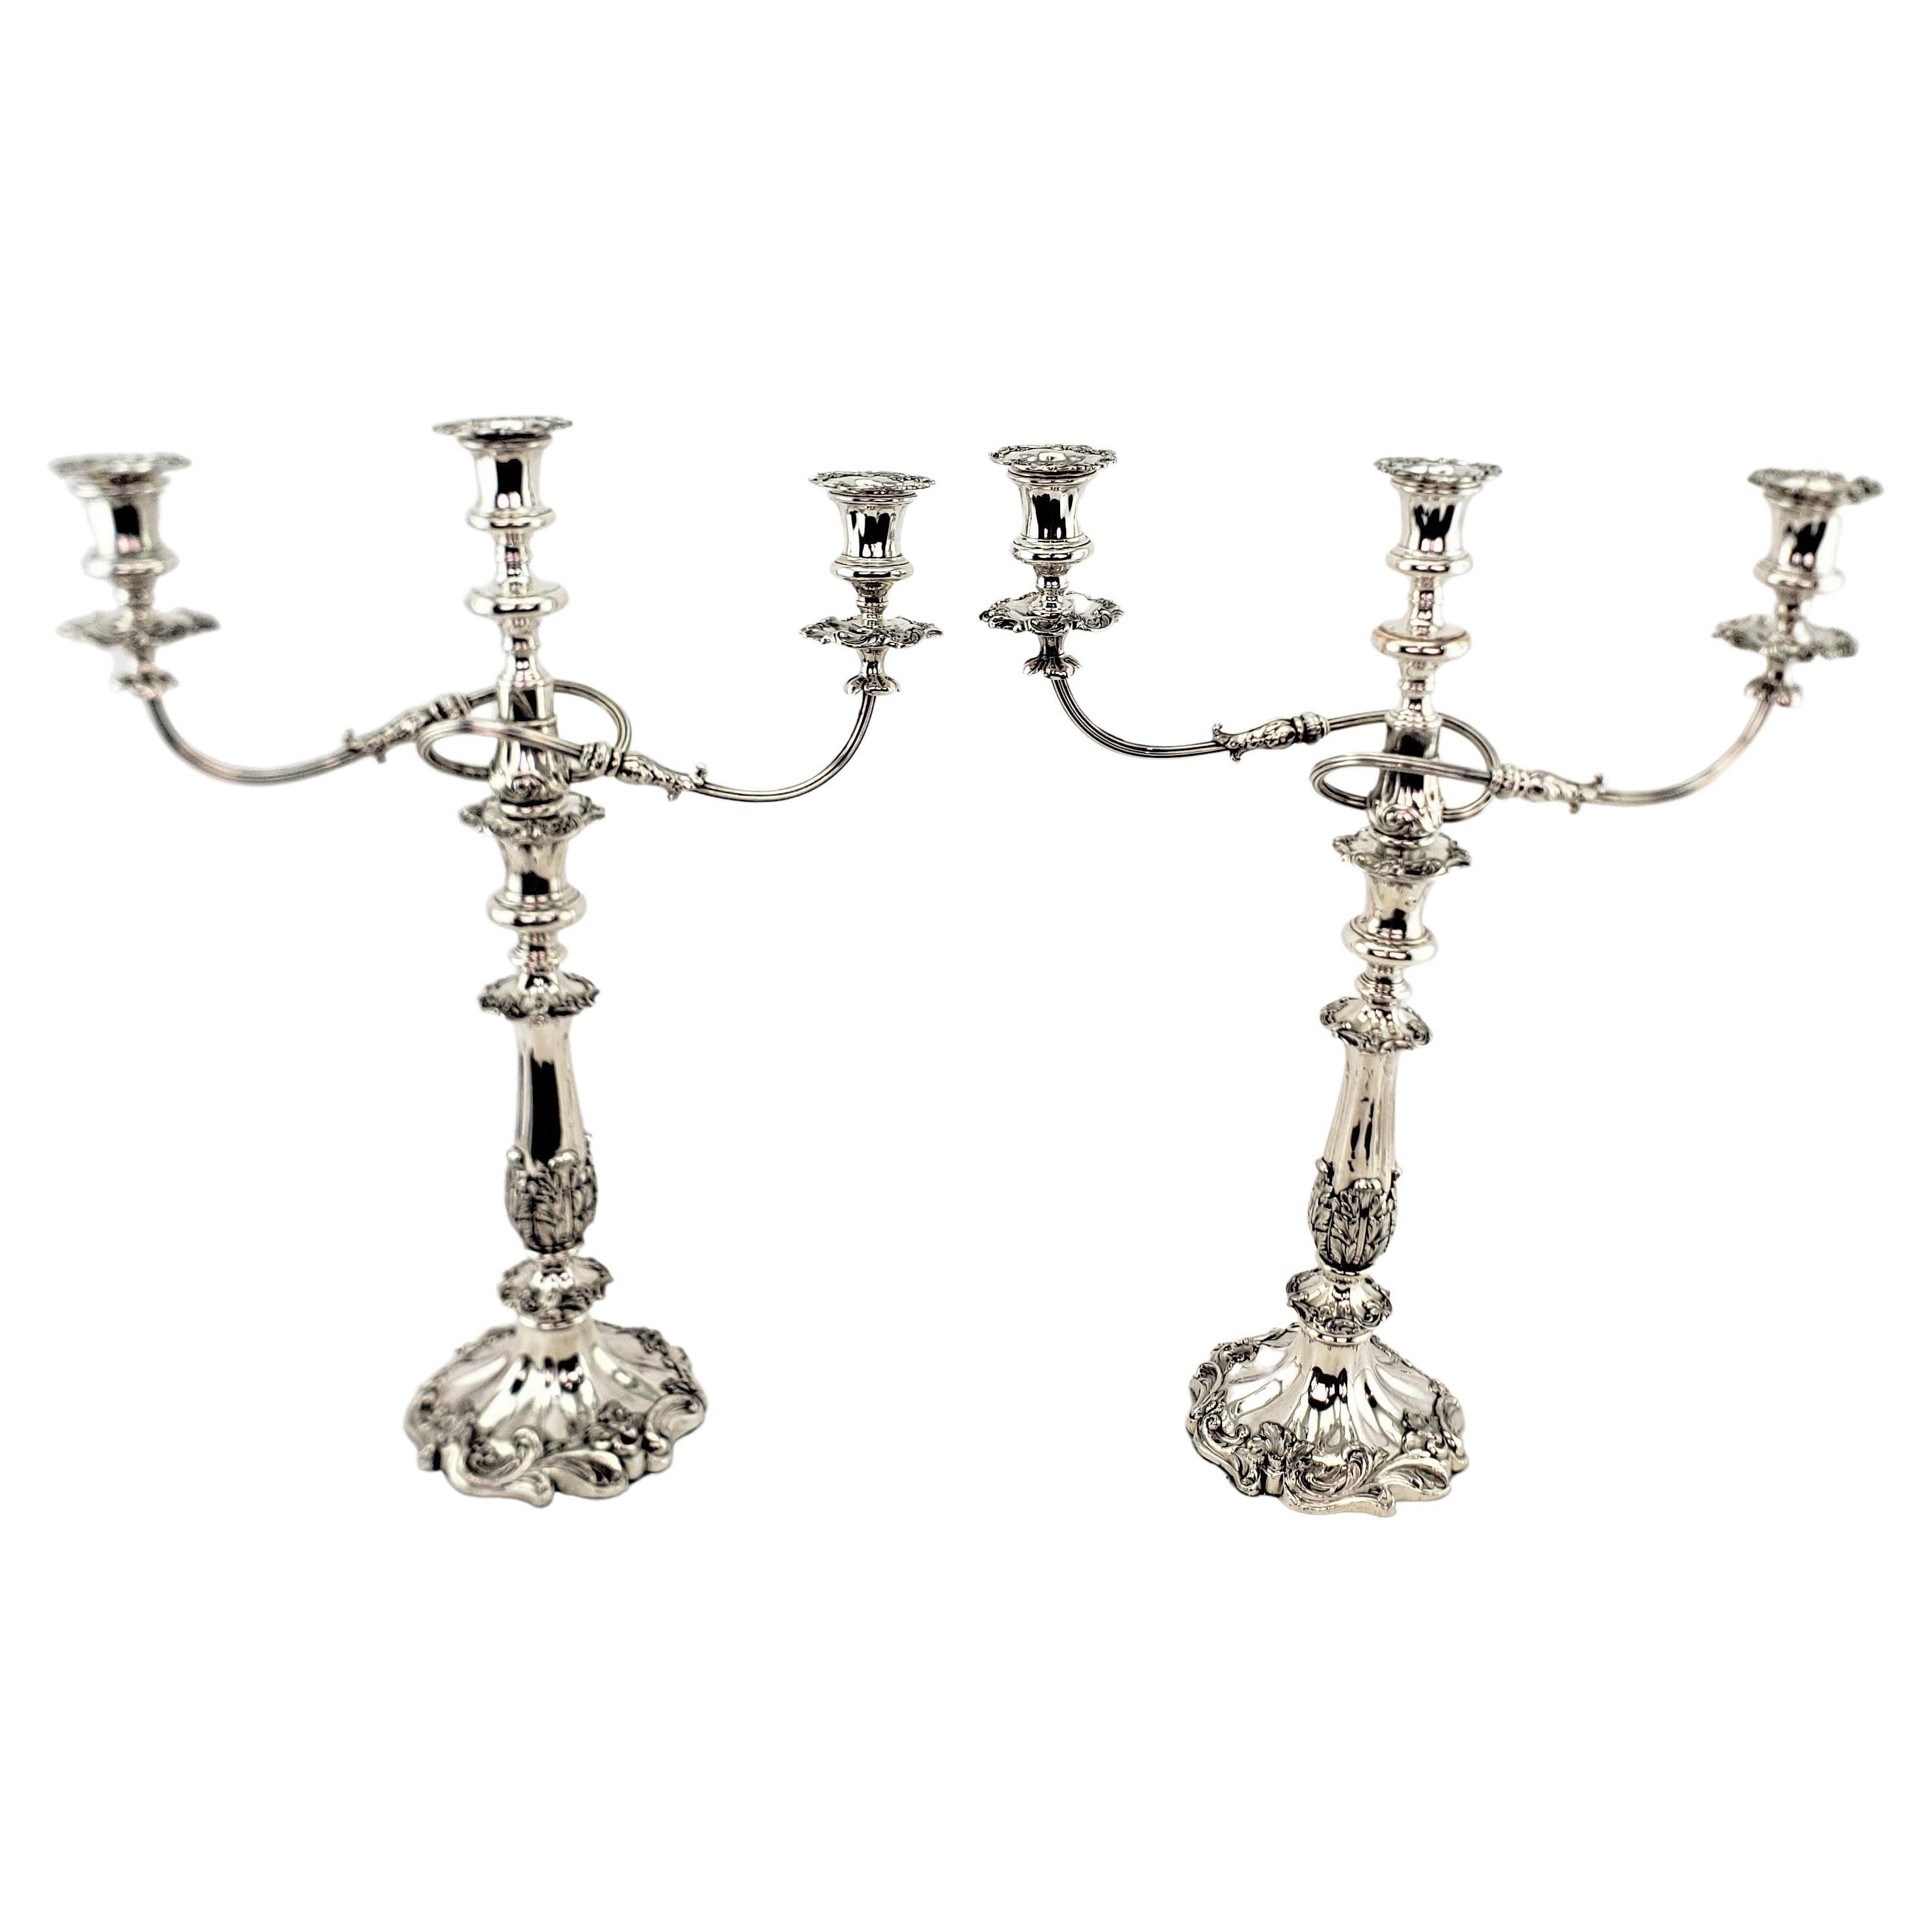 Antique Silver Plated Convertible Candelabras or Candlesticks with Leaf Decor For Sale